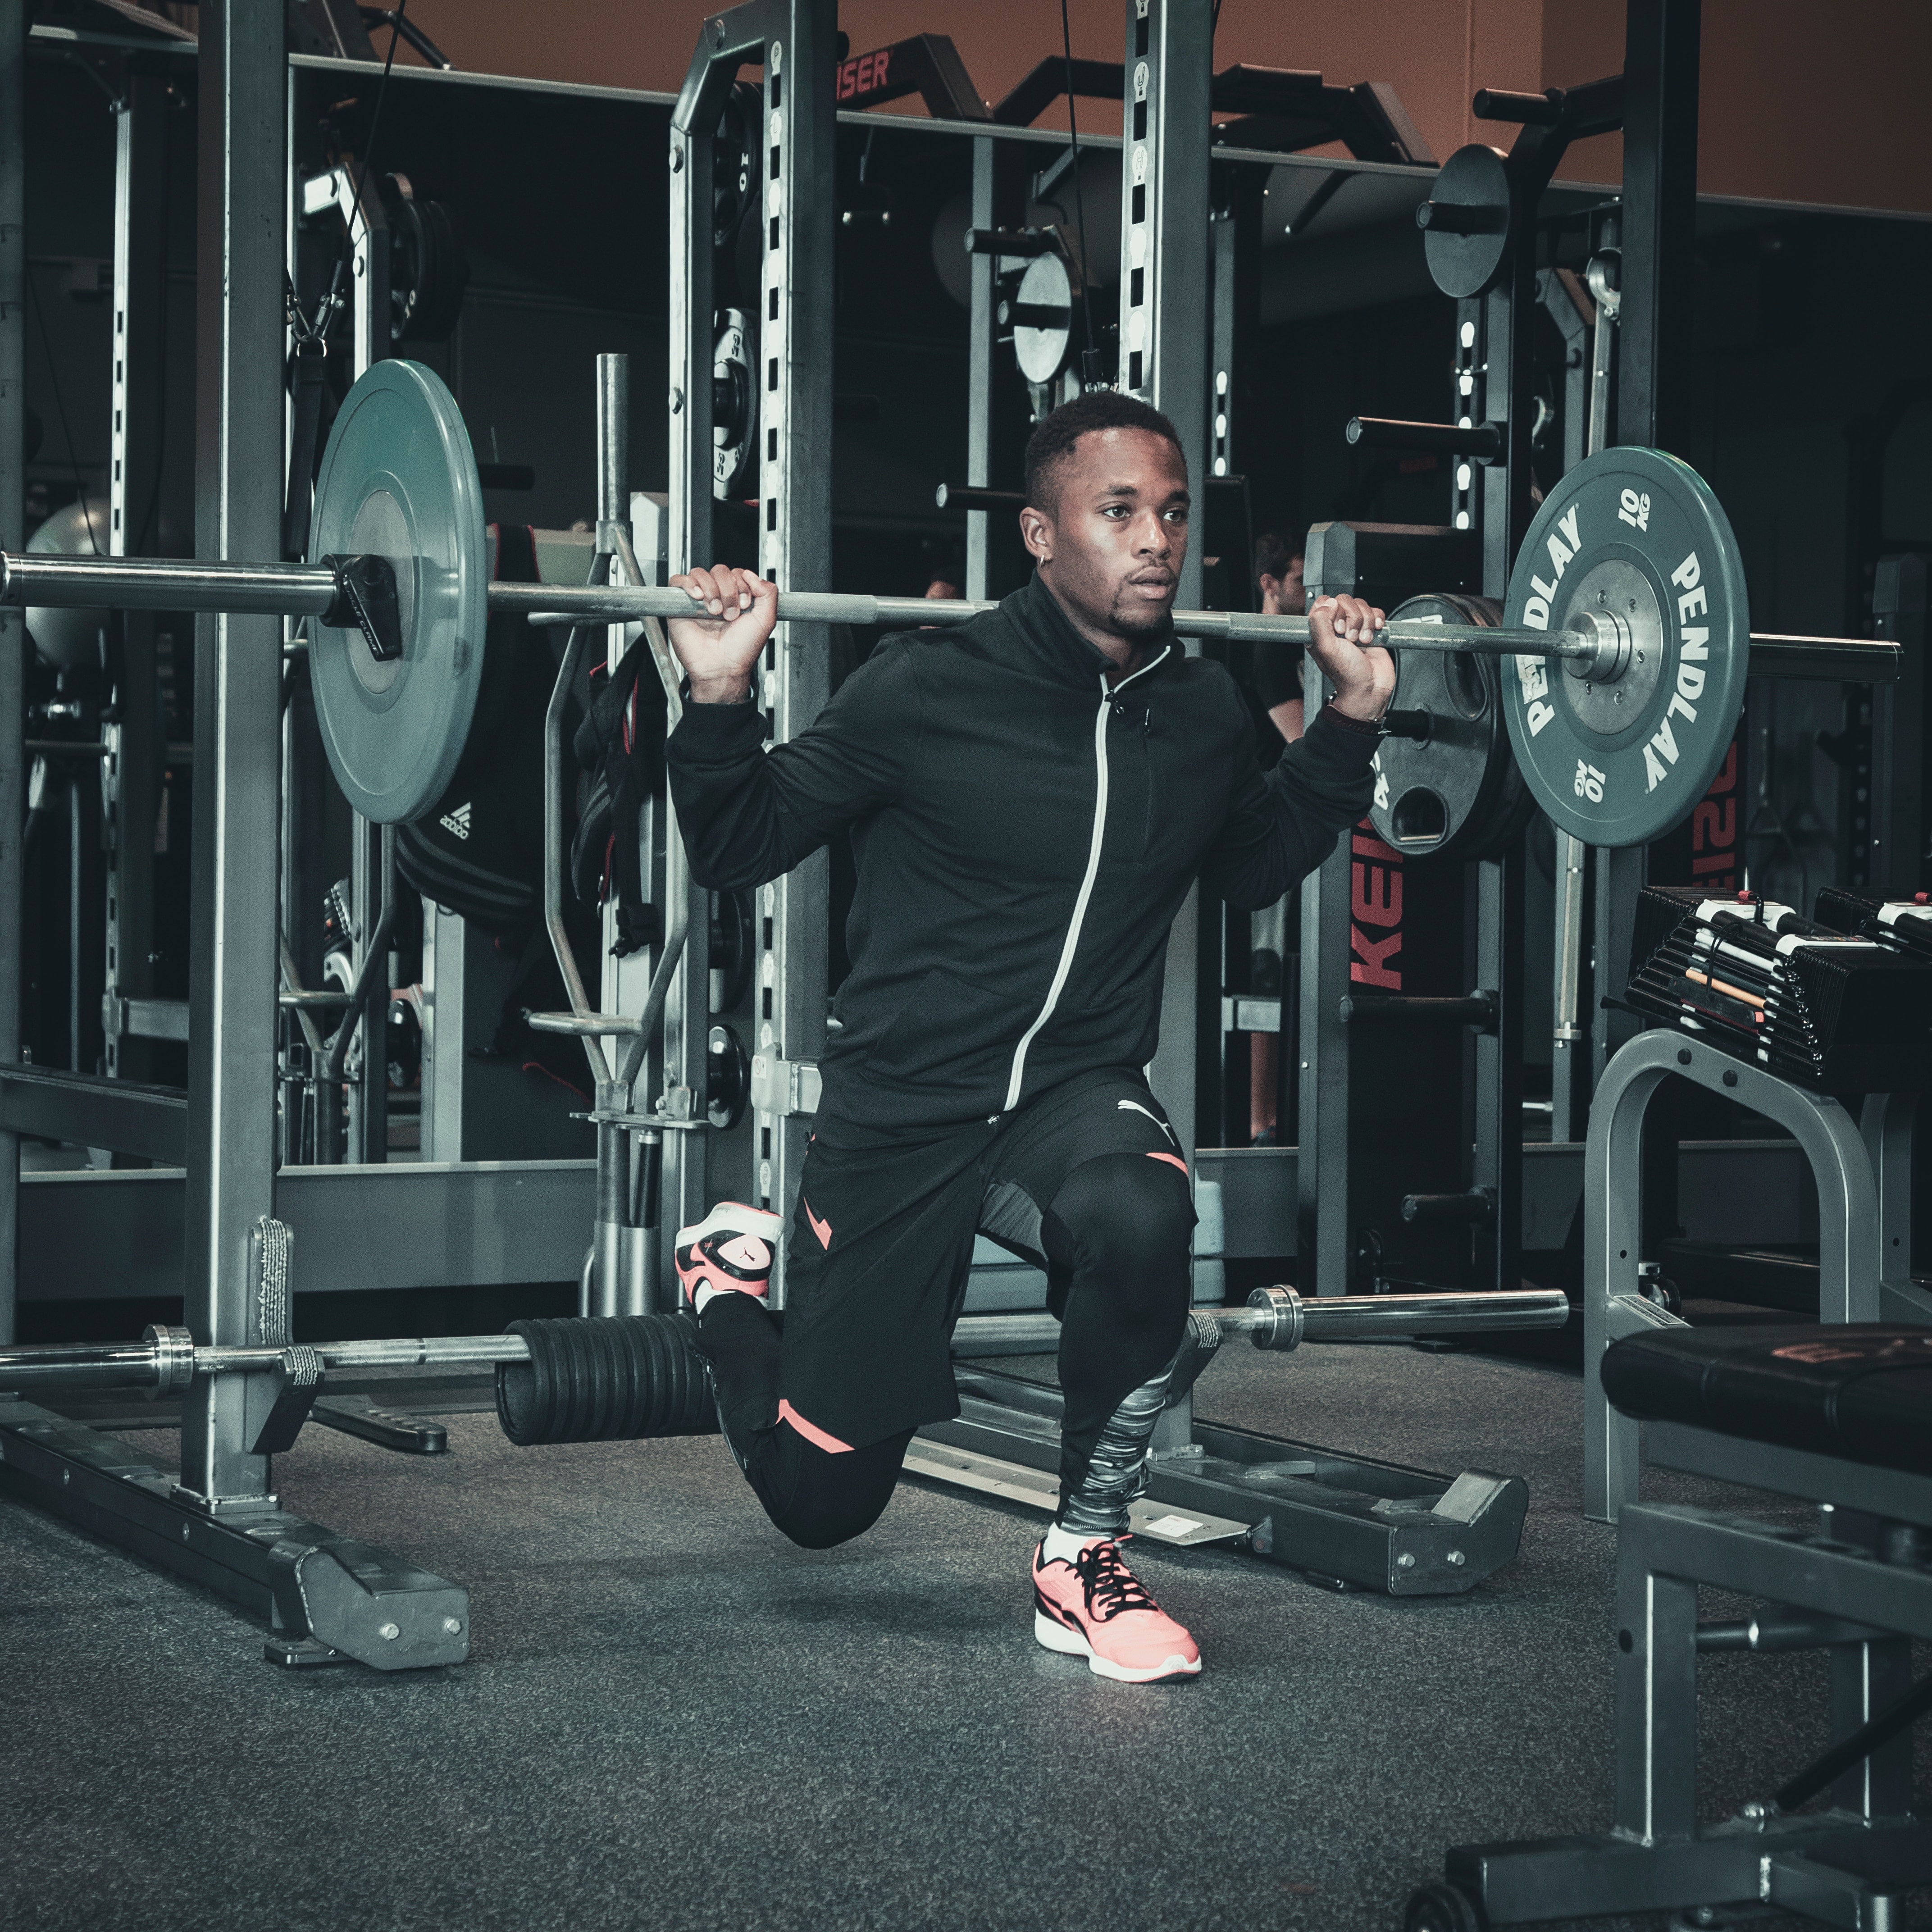 How Many Sets and Reps Should You Do? Guide to Strength Training